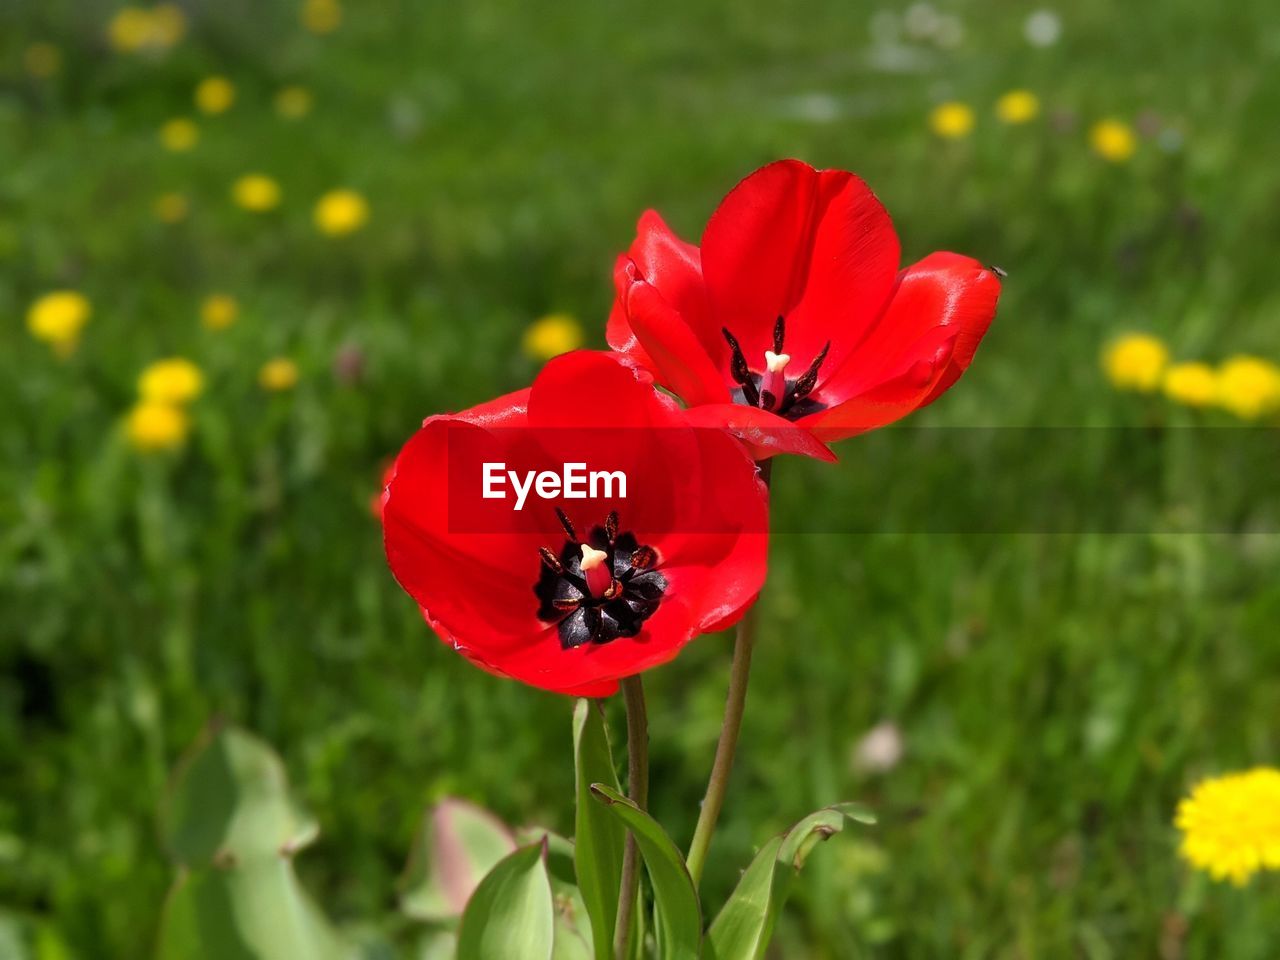 CLOSE-UP OF RED POPPY ON PLANT